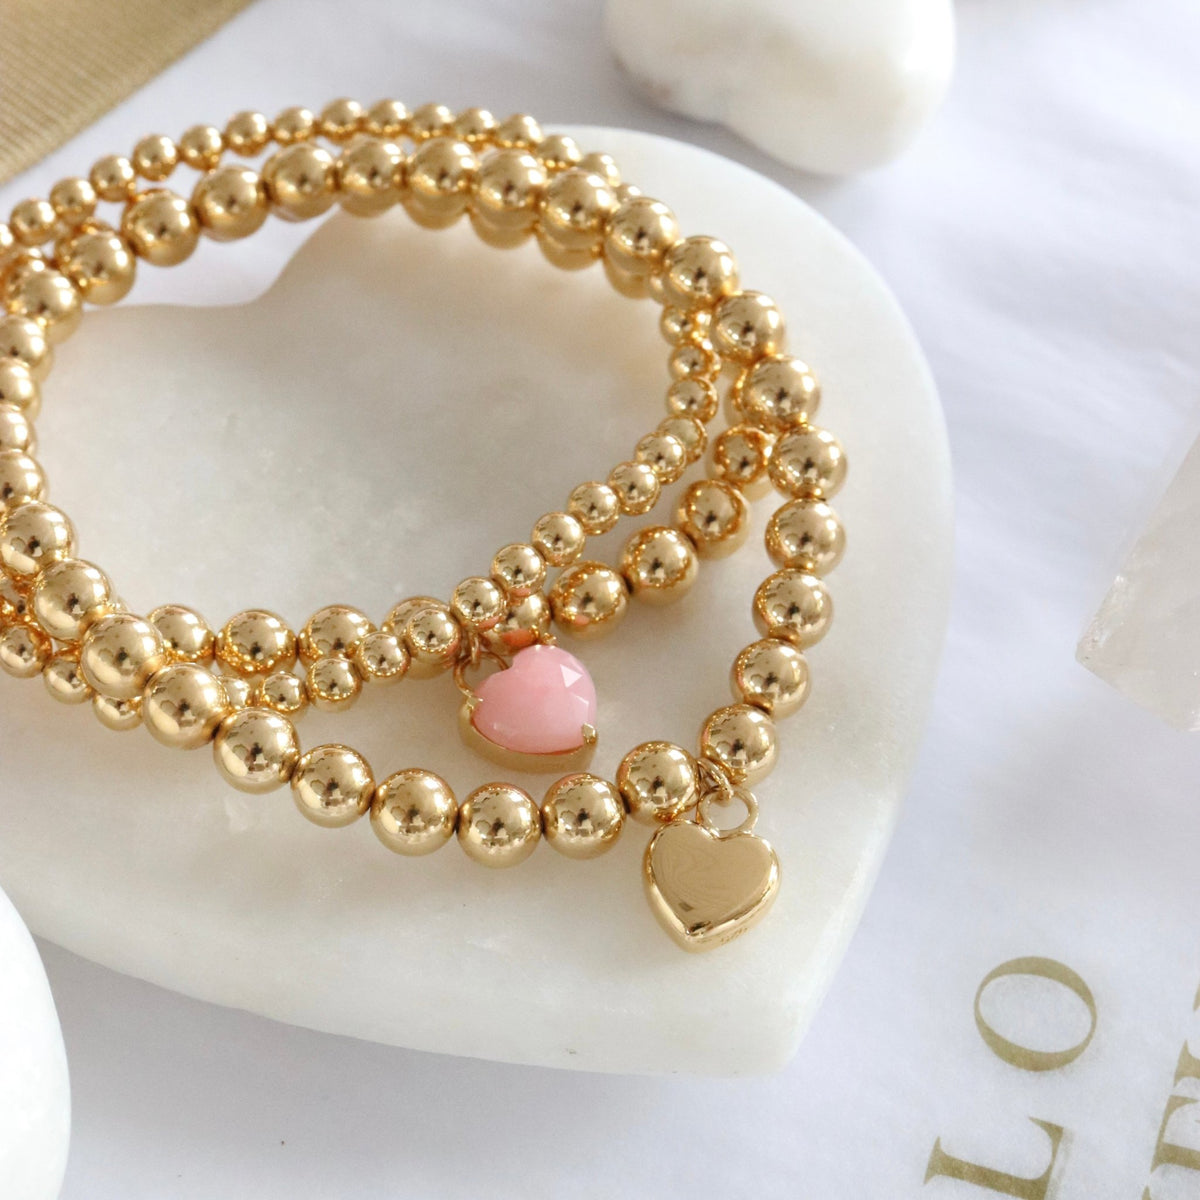 FRAICHE INSPIRE SWEETHEART STRETCH BRACELET – PINK OPAL &amp; GOLD 7&quot; - SO PRETTY CARA COTTER